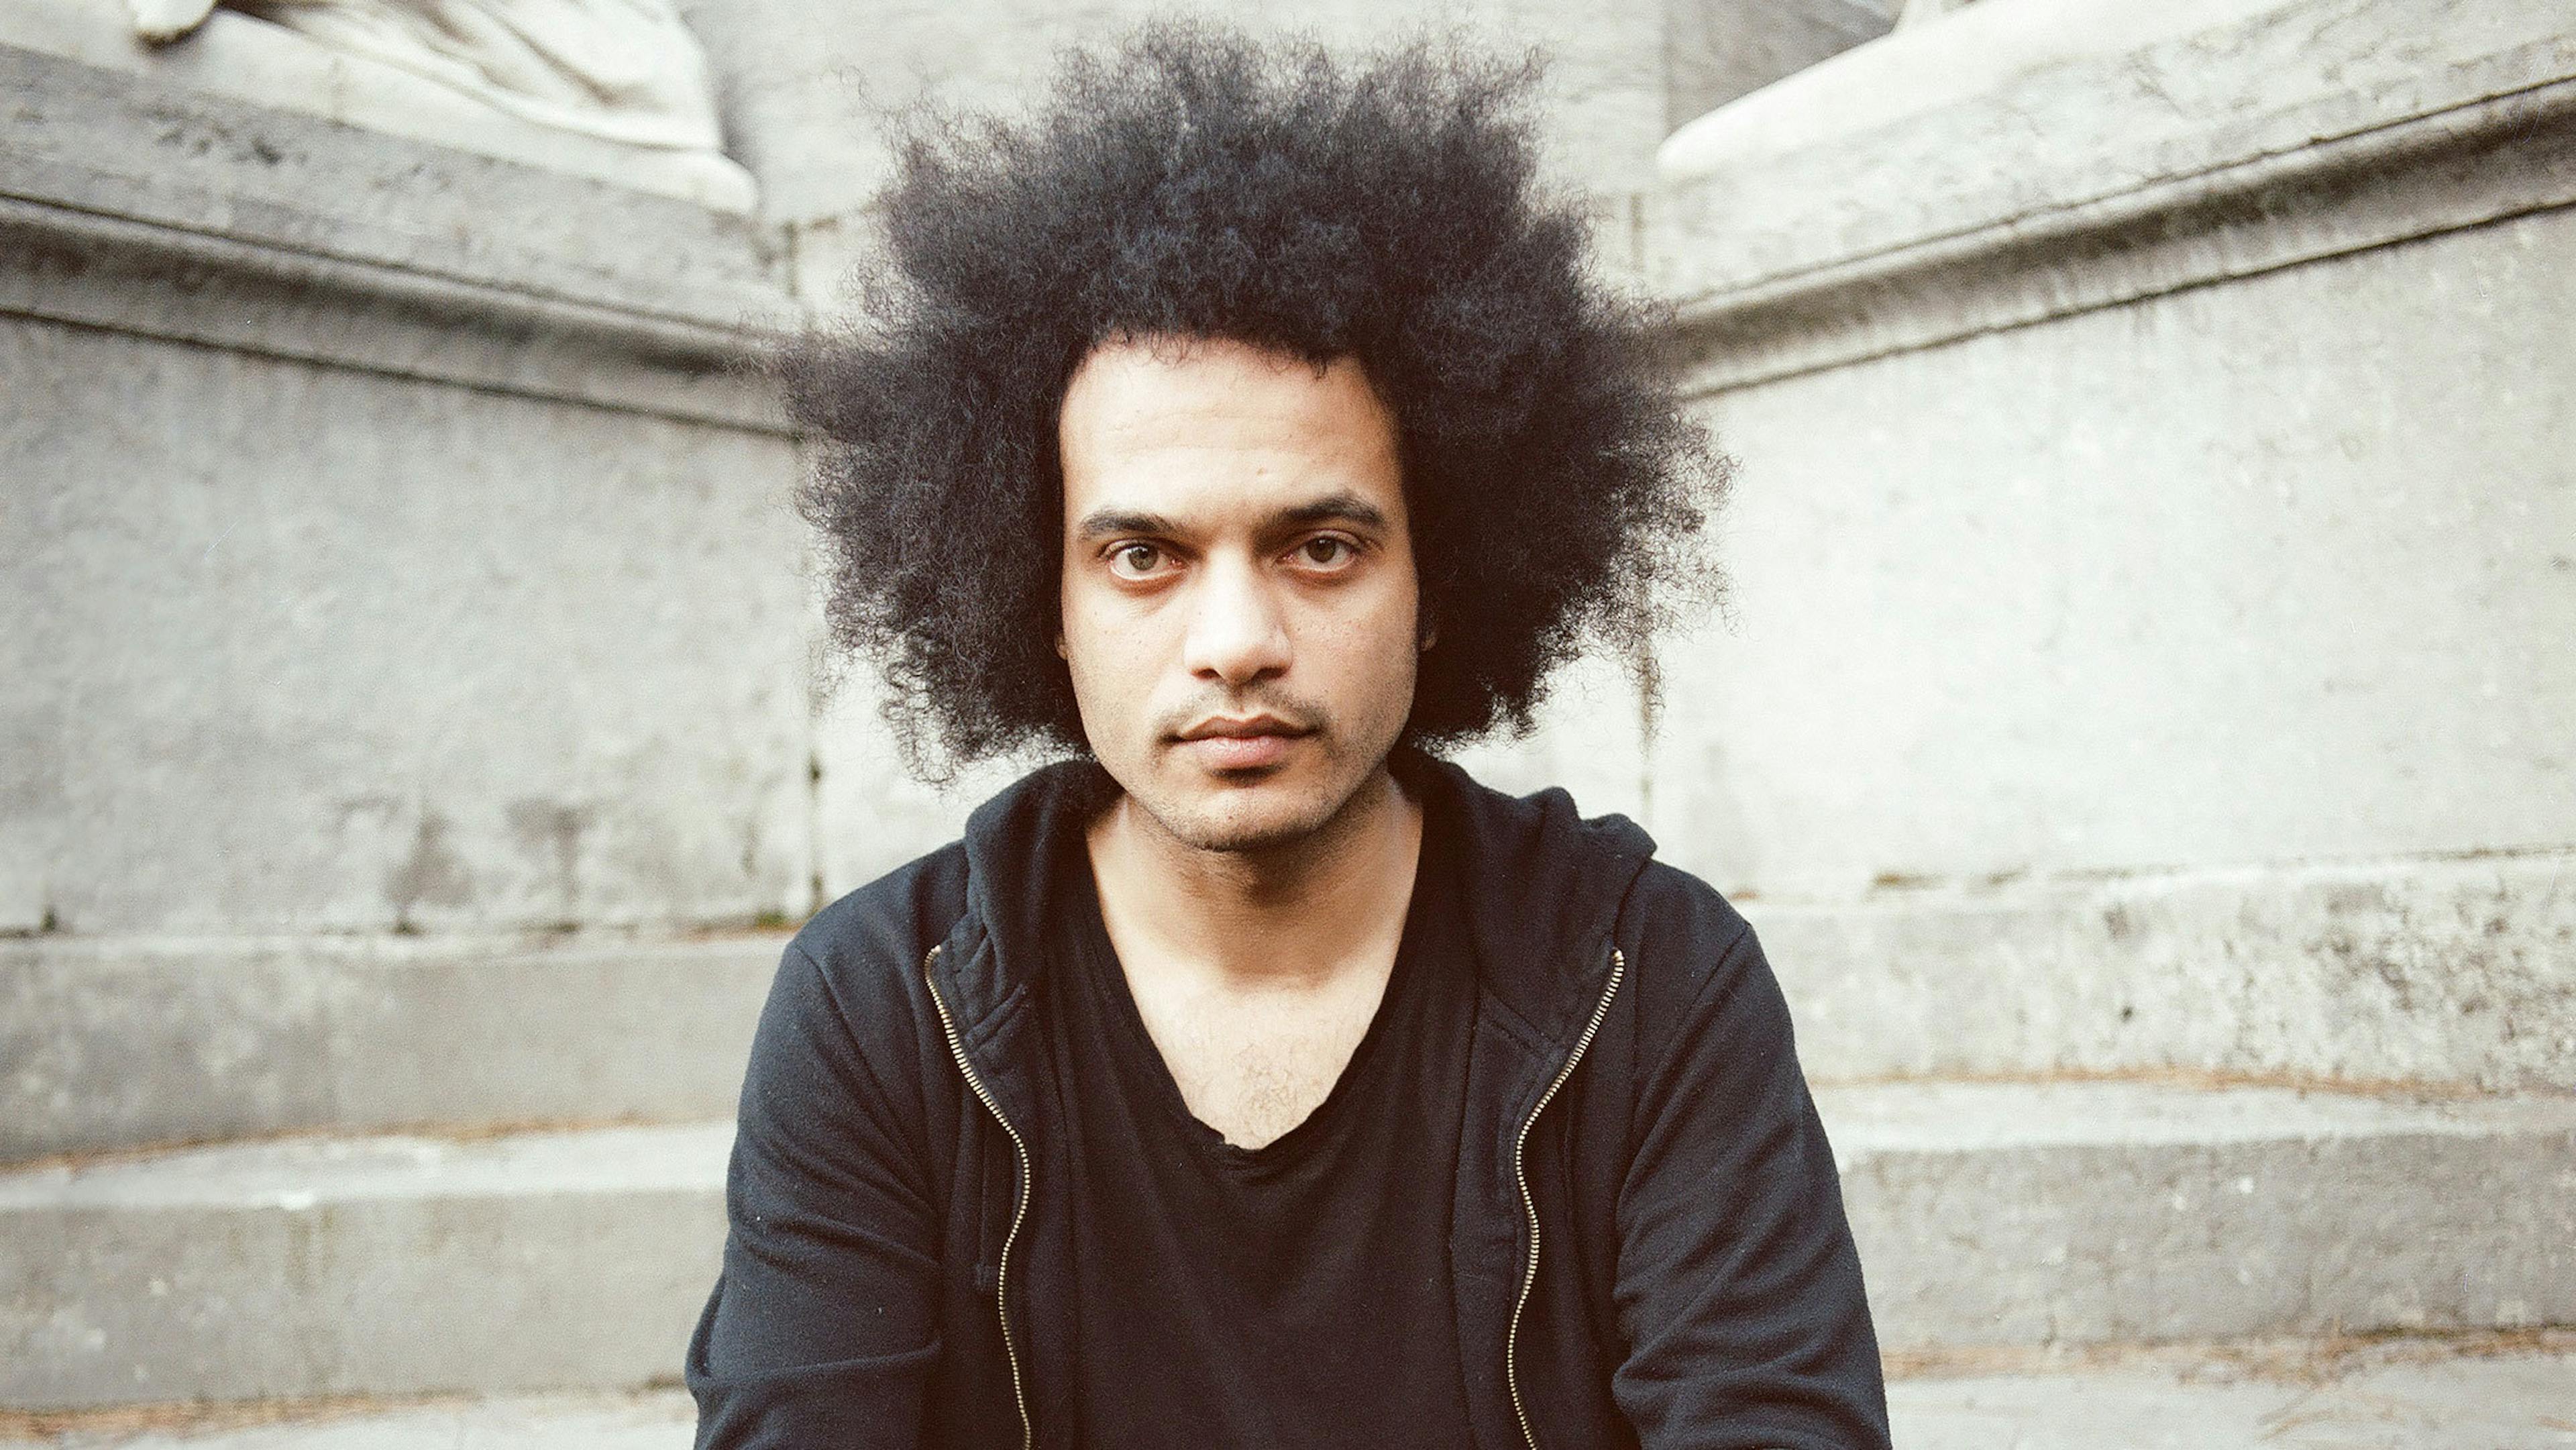 “It’s both smoke and fire”: Listen to Zeal & Ardor’s atmospheric new single Golden Liar